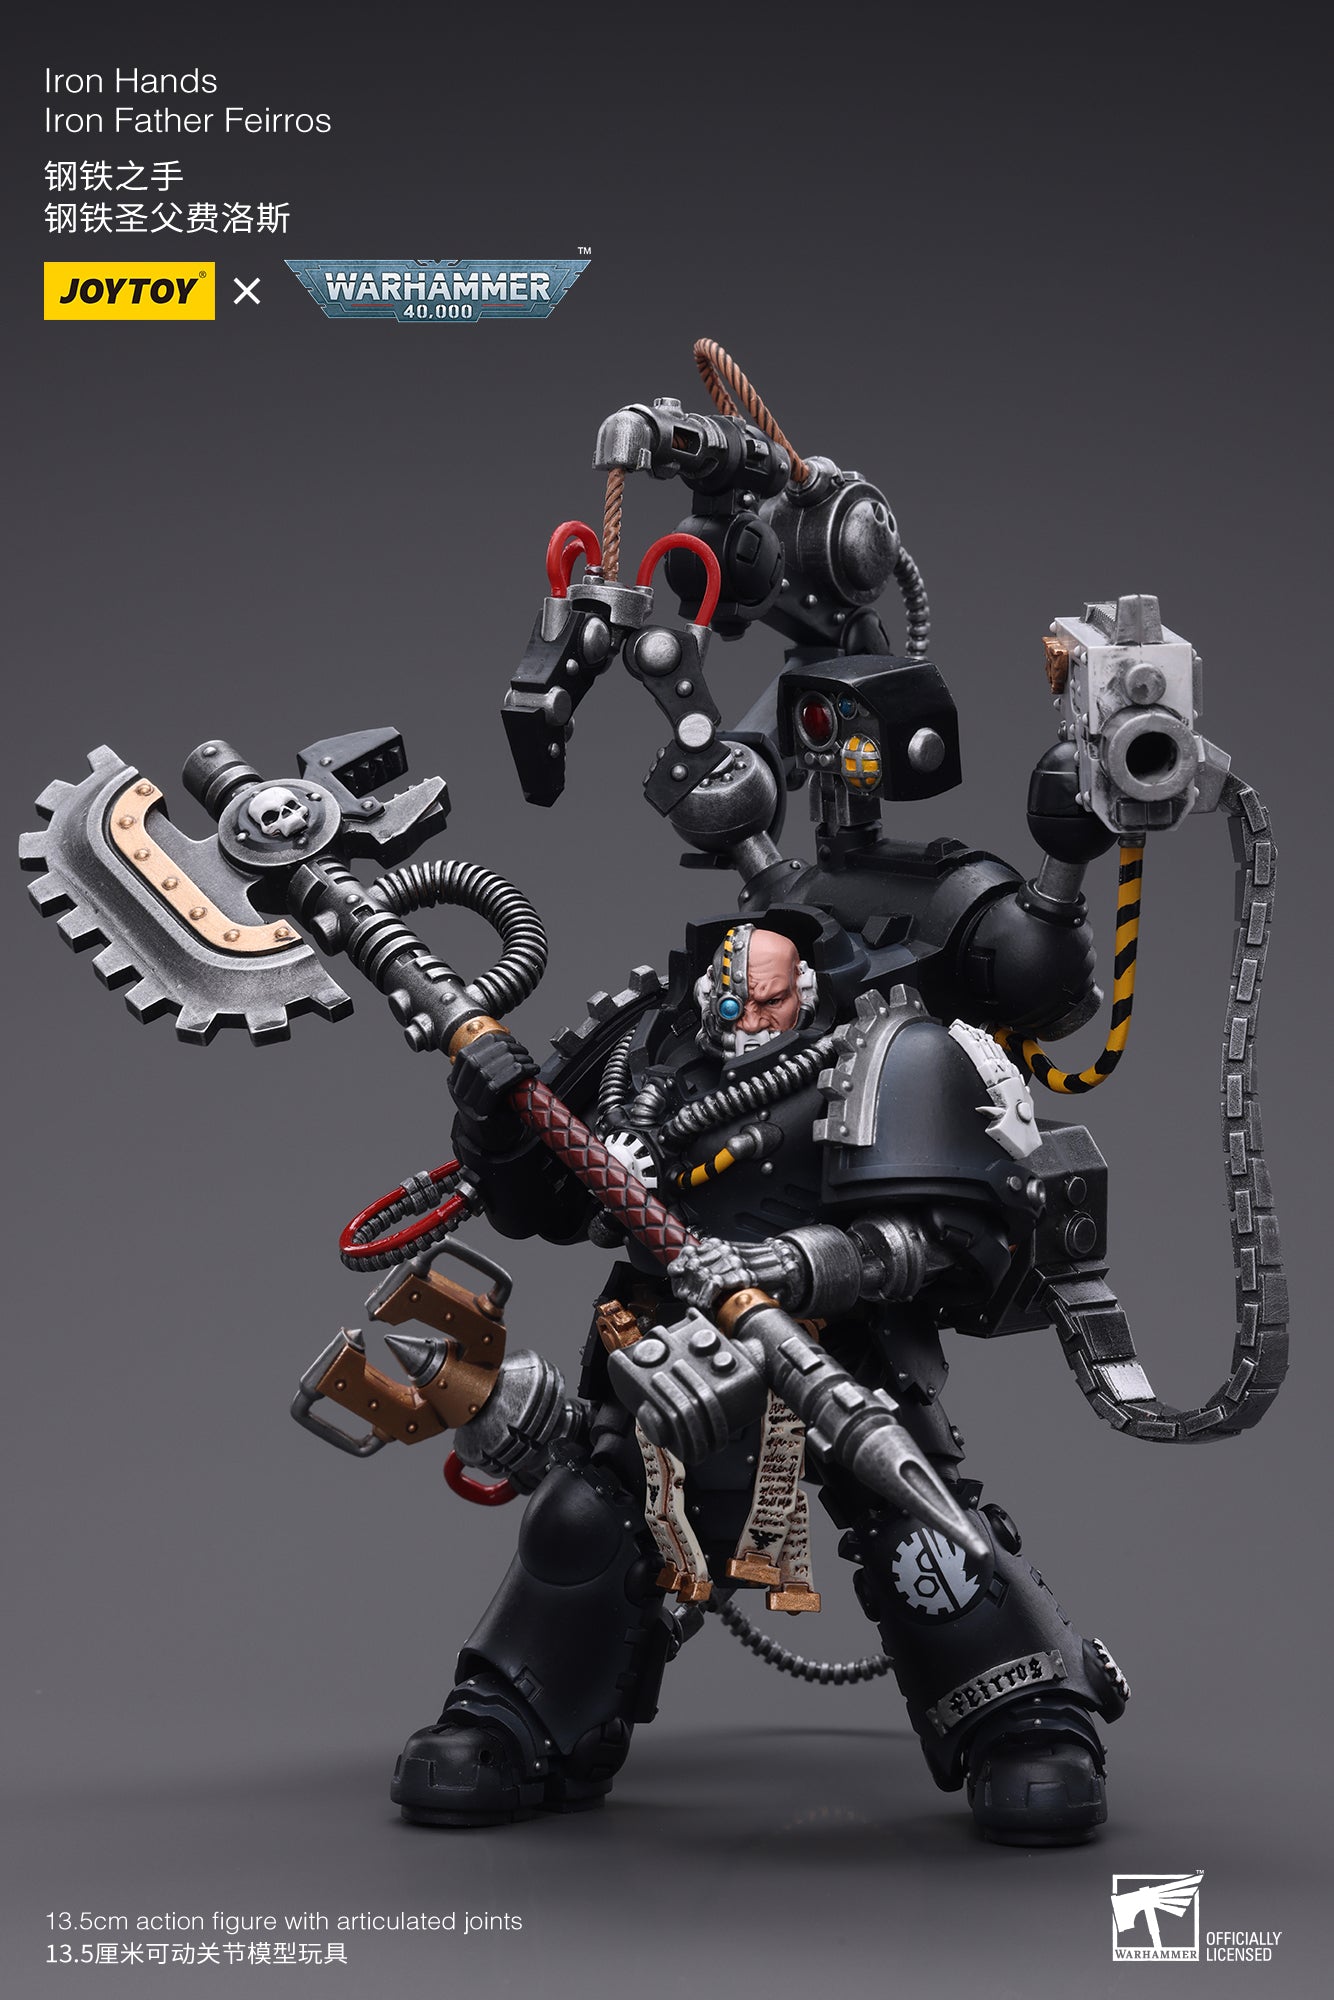 Iron Hands lron Father Feirros - Warhammer 40K Action Figure By JOYTOY